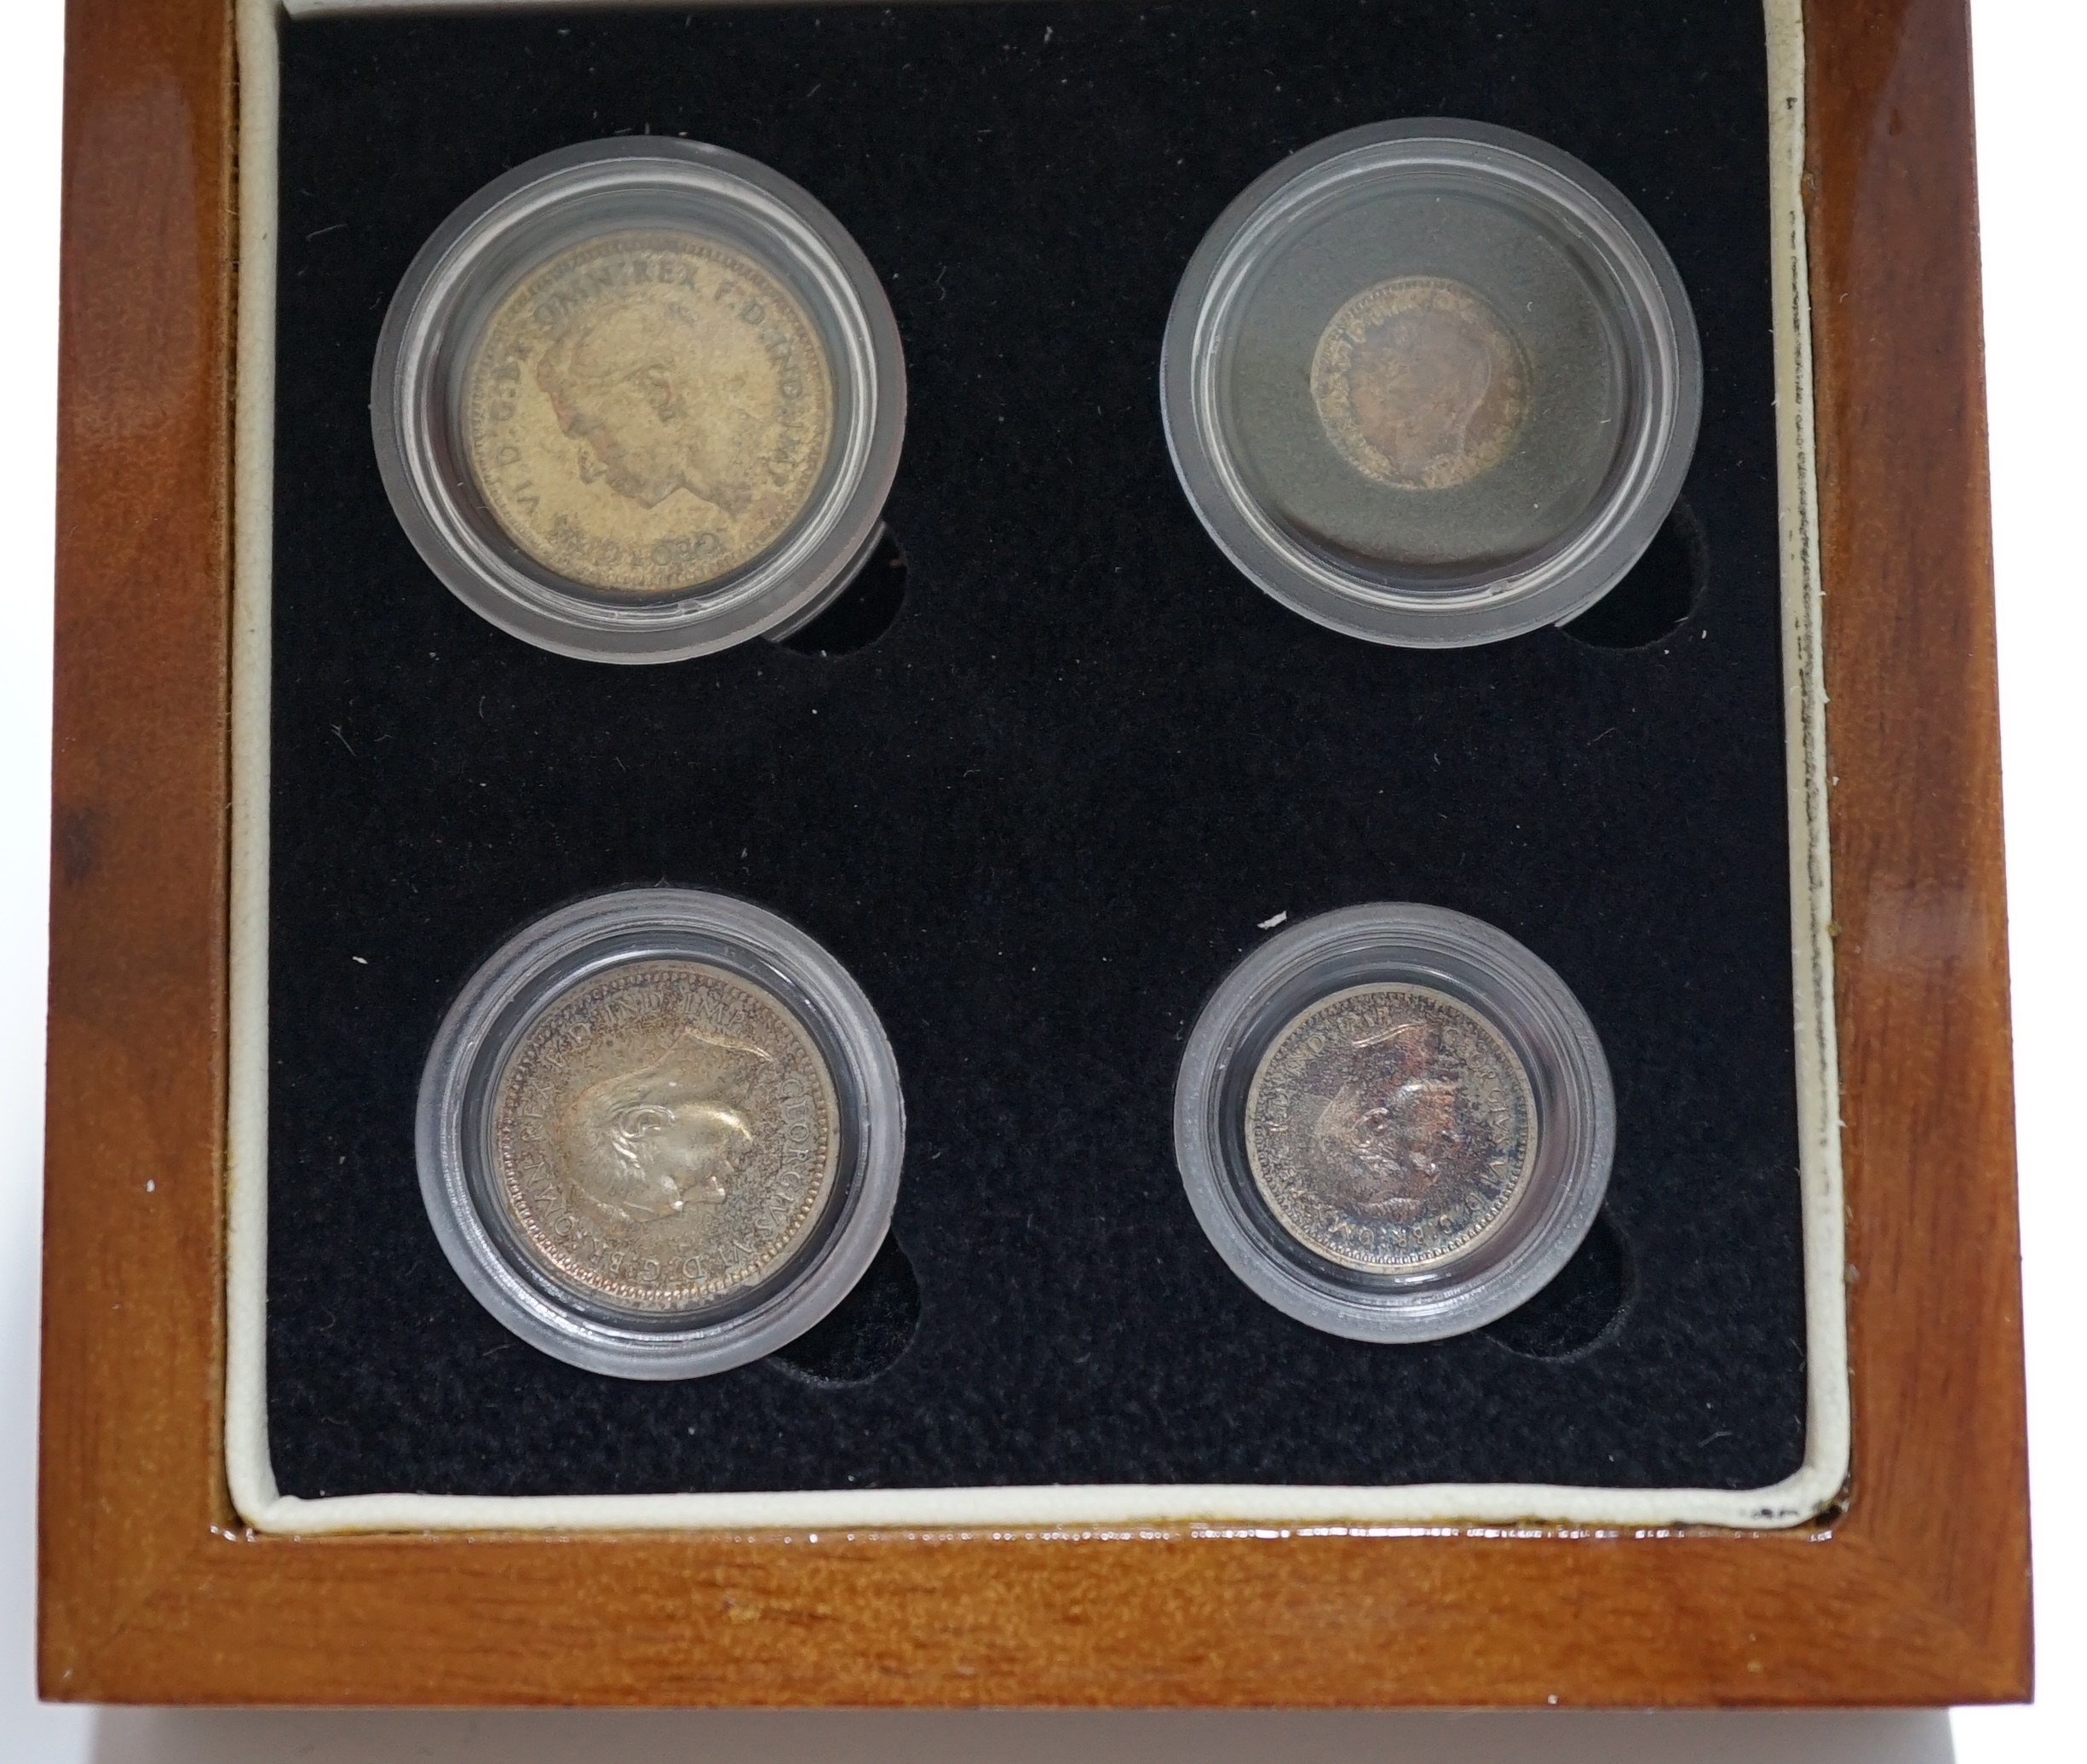 British silver coins, George VI four coin set of Maundy coins, 1939, toned UNC, in London mint case